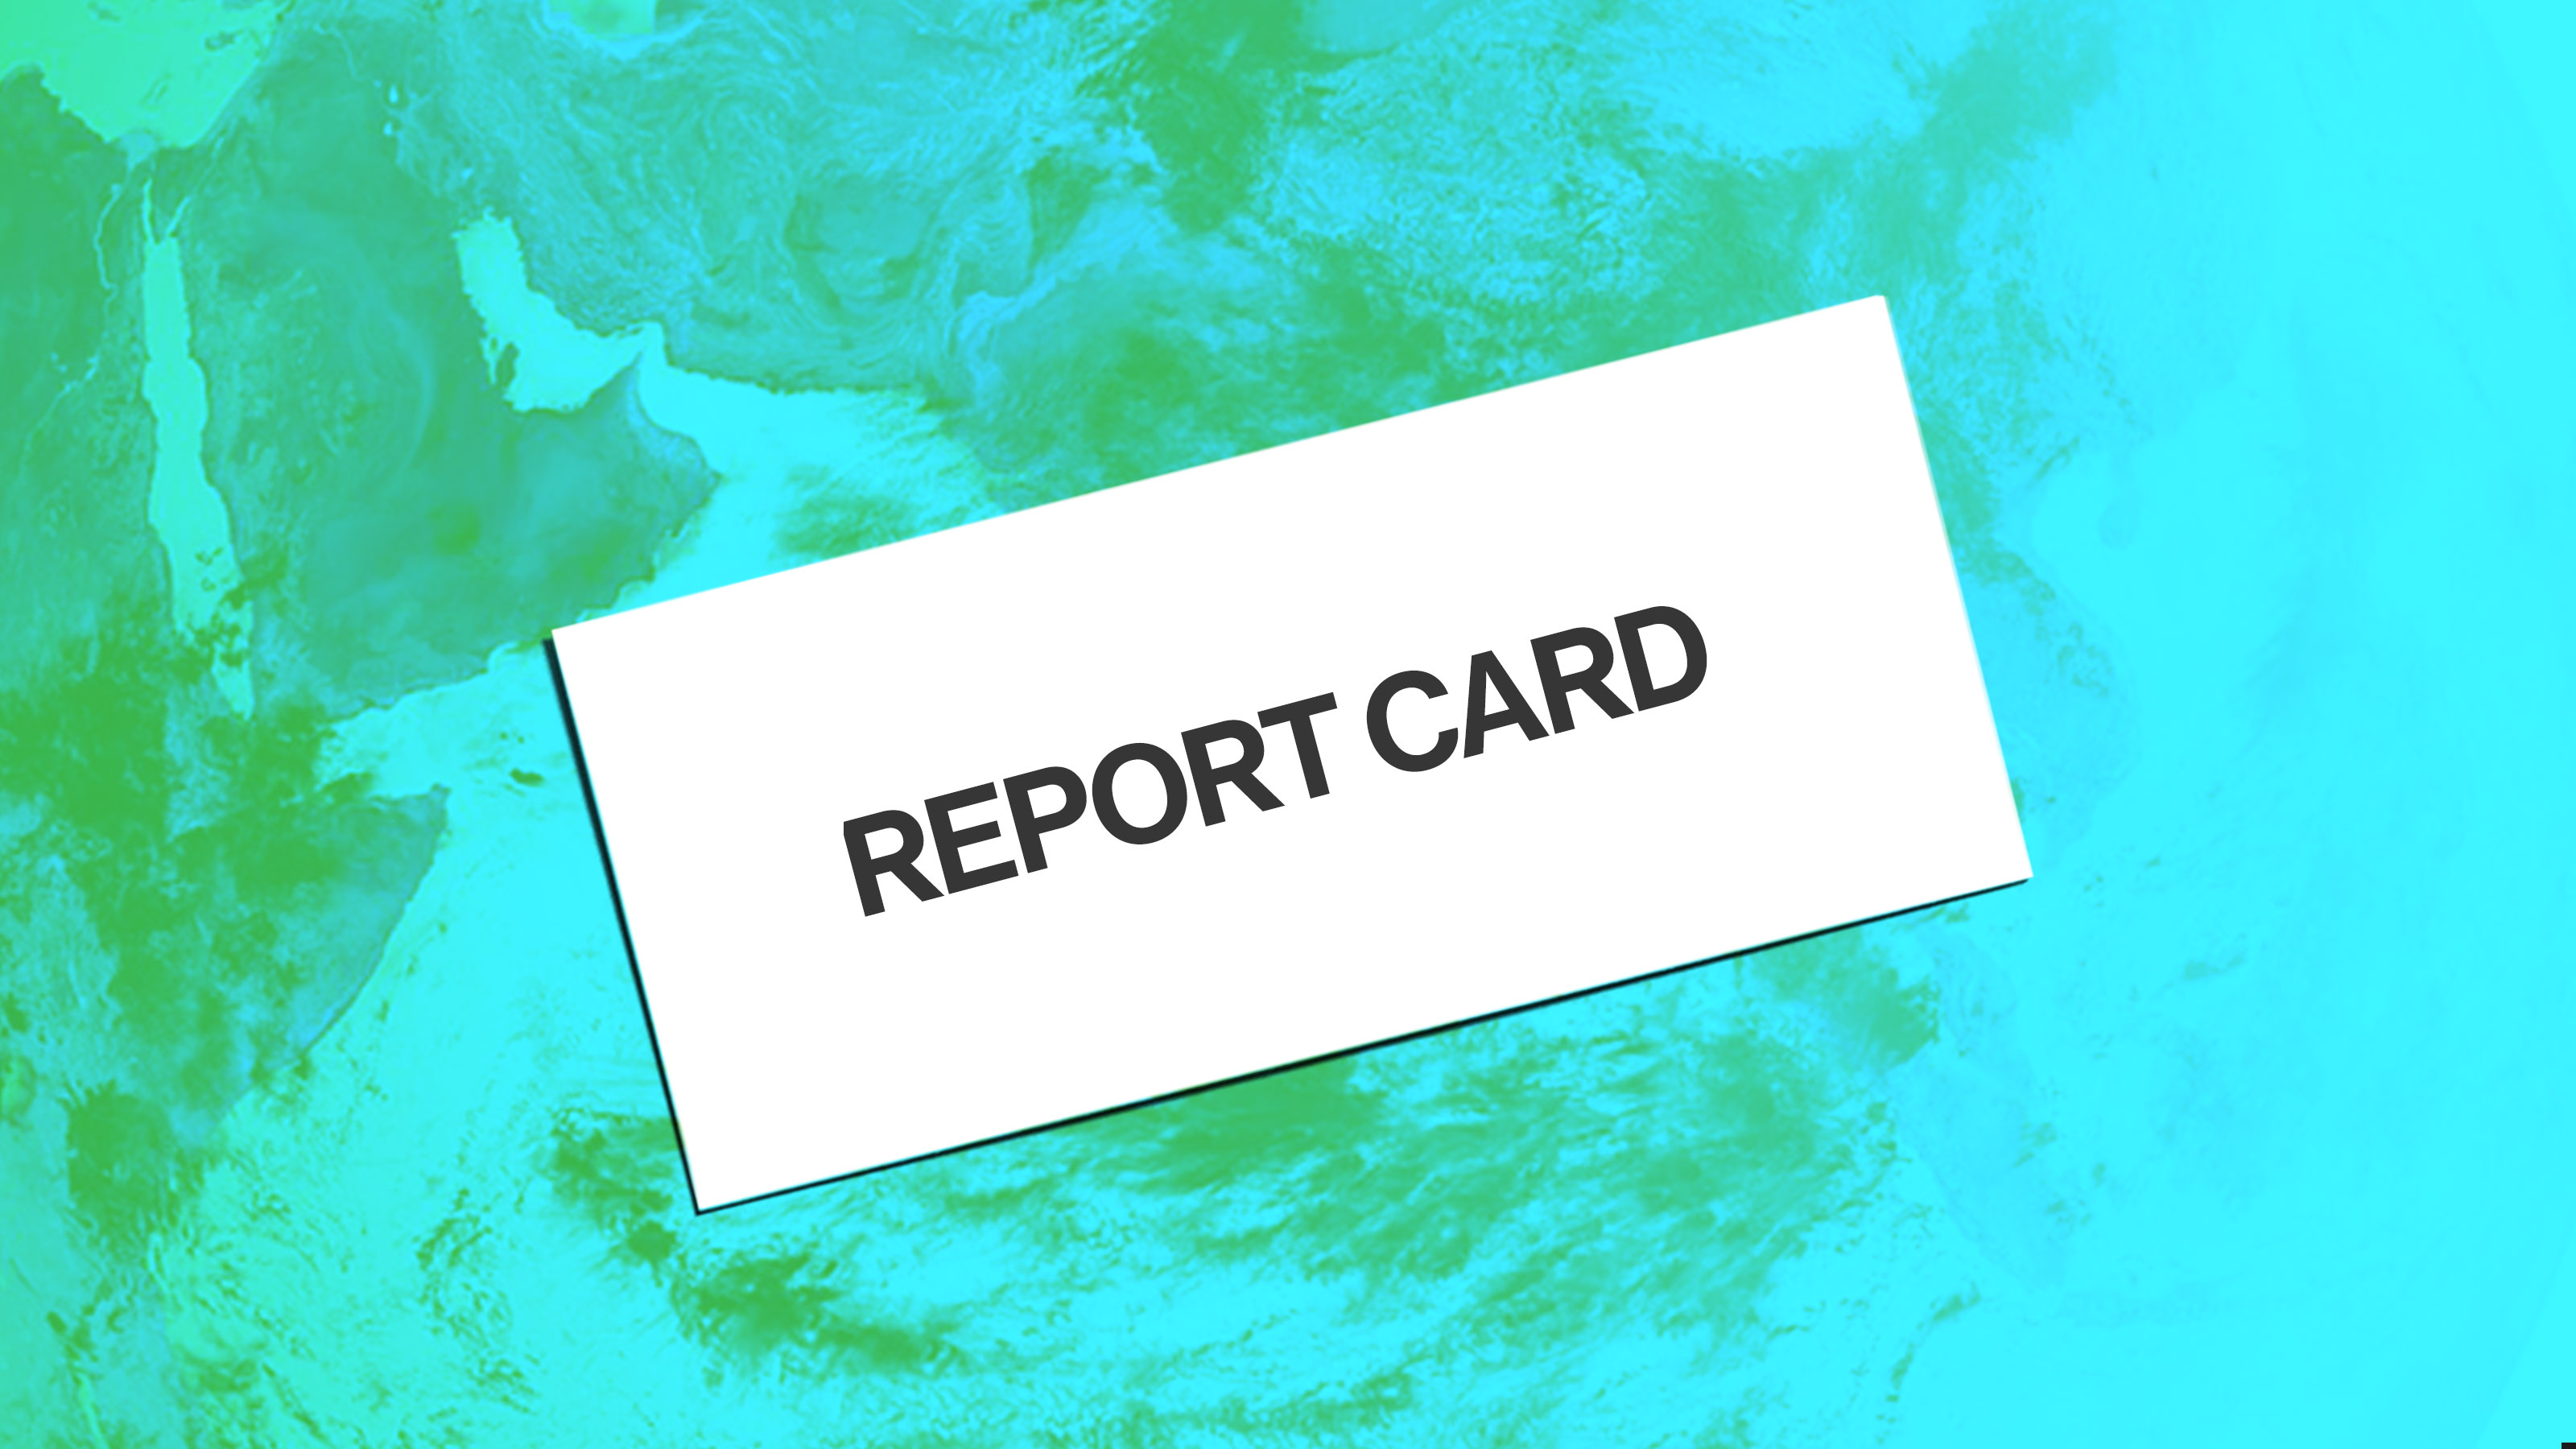 Image of an envelope reading &quot;Report card&quot; on a planet earth blue and green background